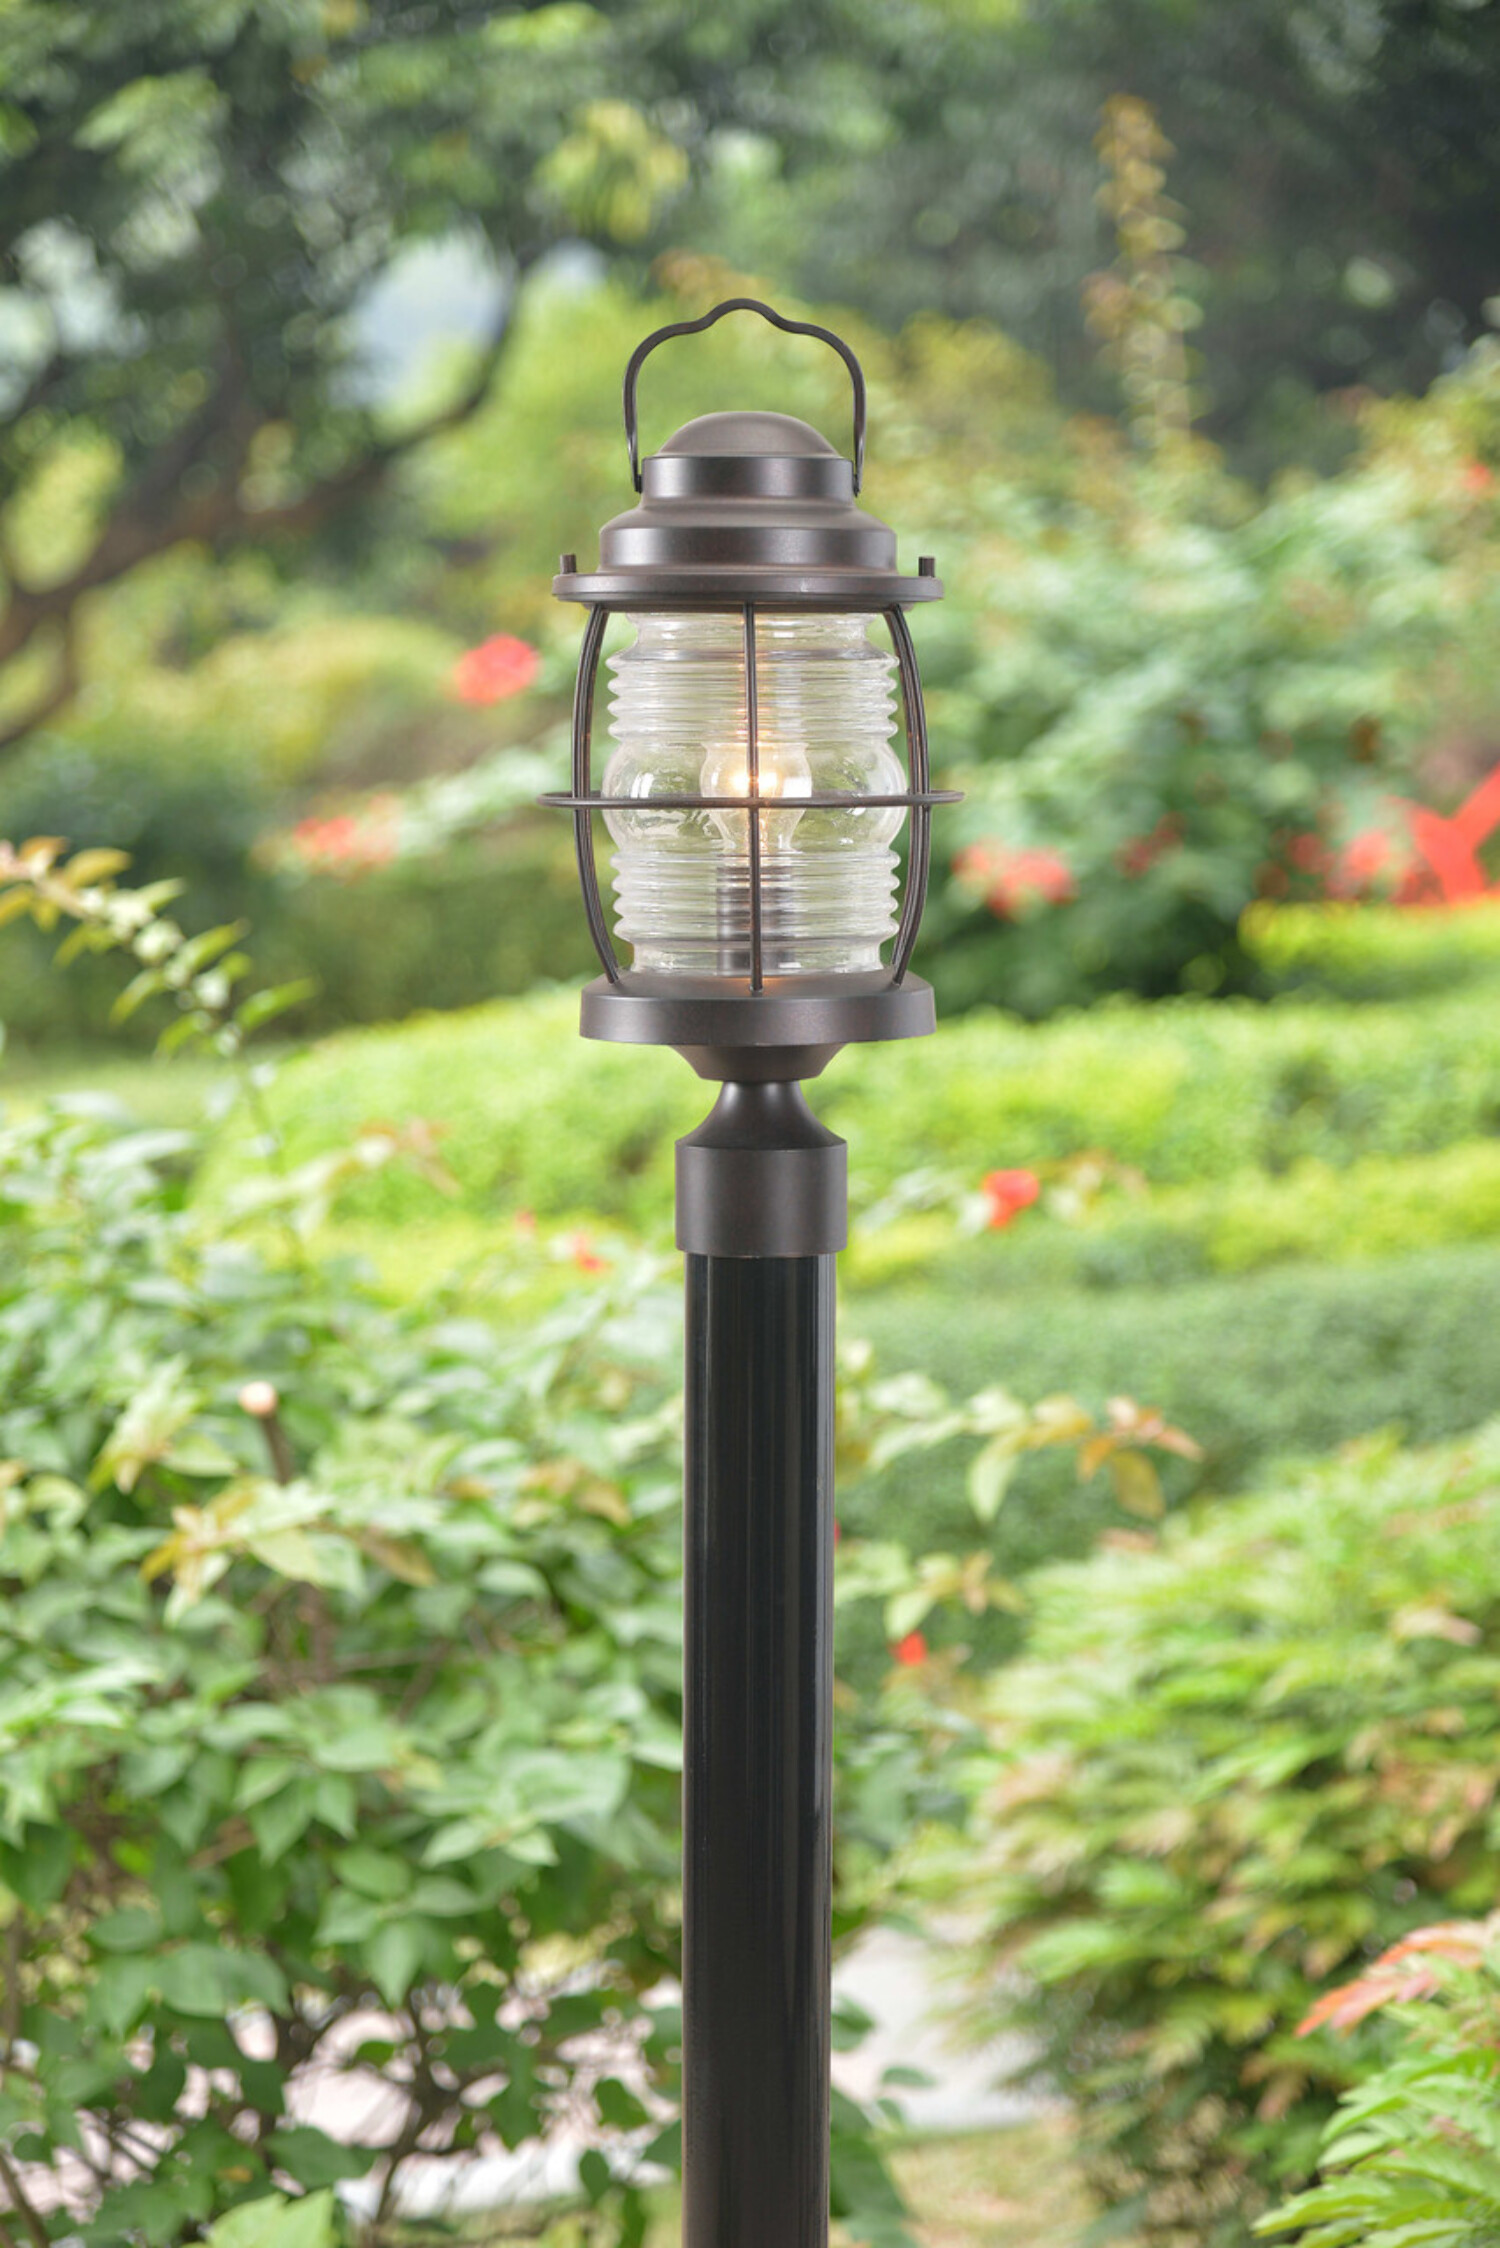 Beacon 1 Light Post Lantern with Copper Finish - image 1 of 8